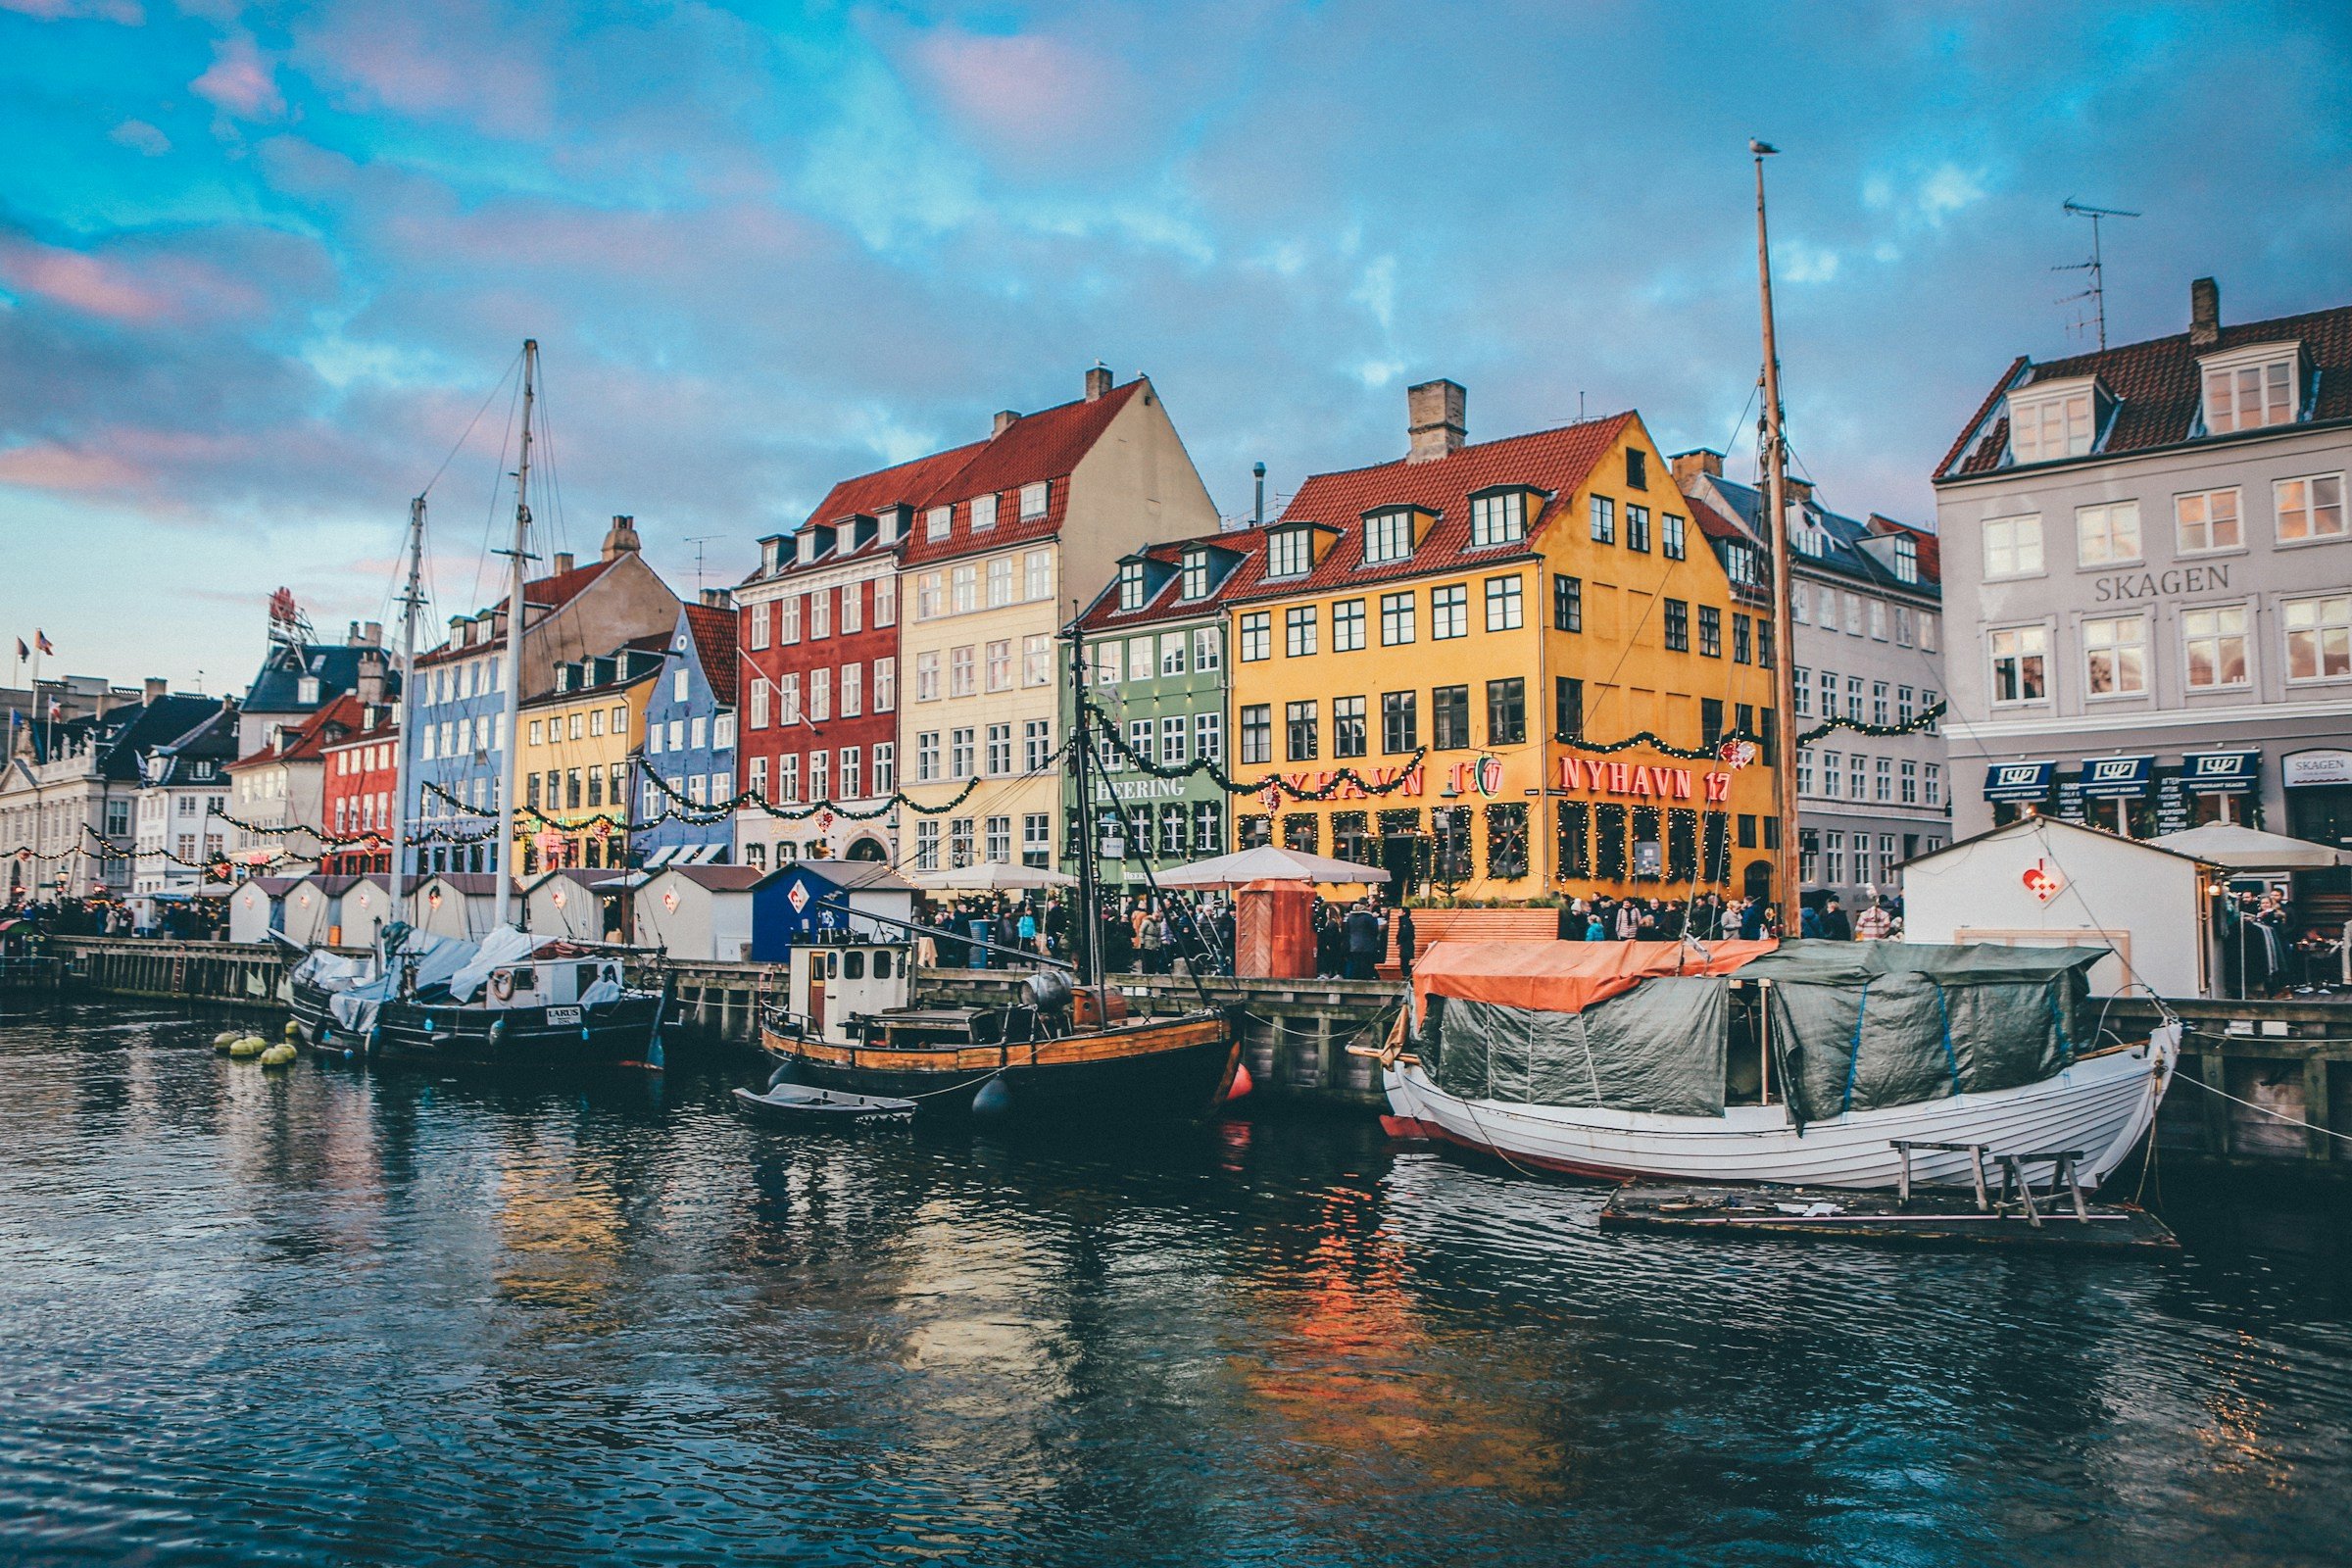 Boats in Nyhavn in Copenhagen with colorful buildings in the background